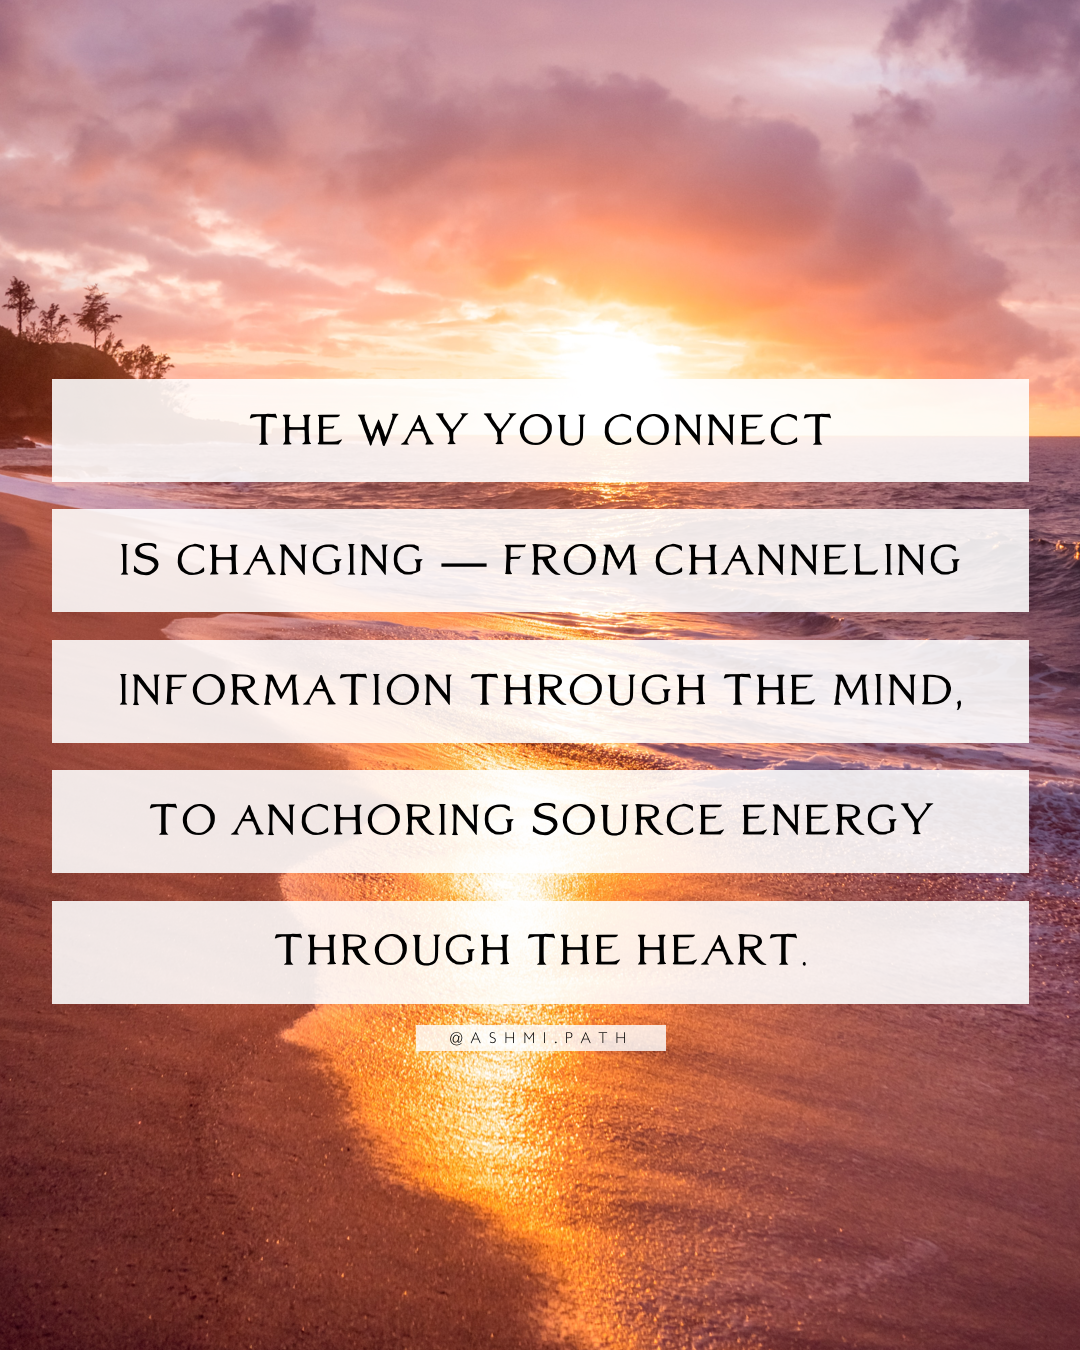 Channeling the Heart - 2 Hour Ceremony & Workshop Special